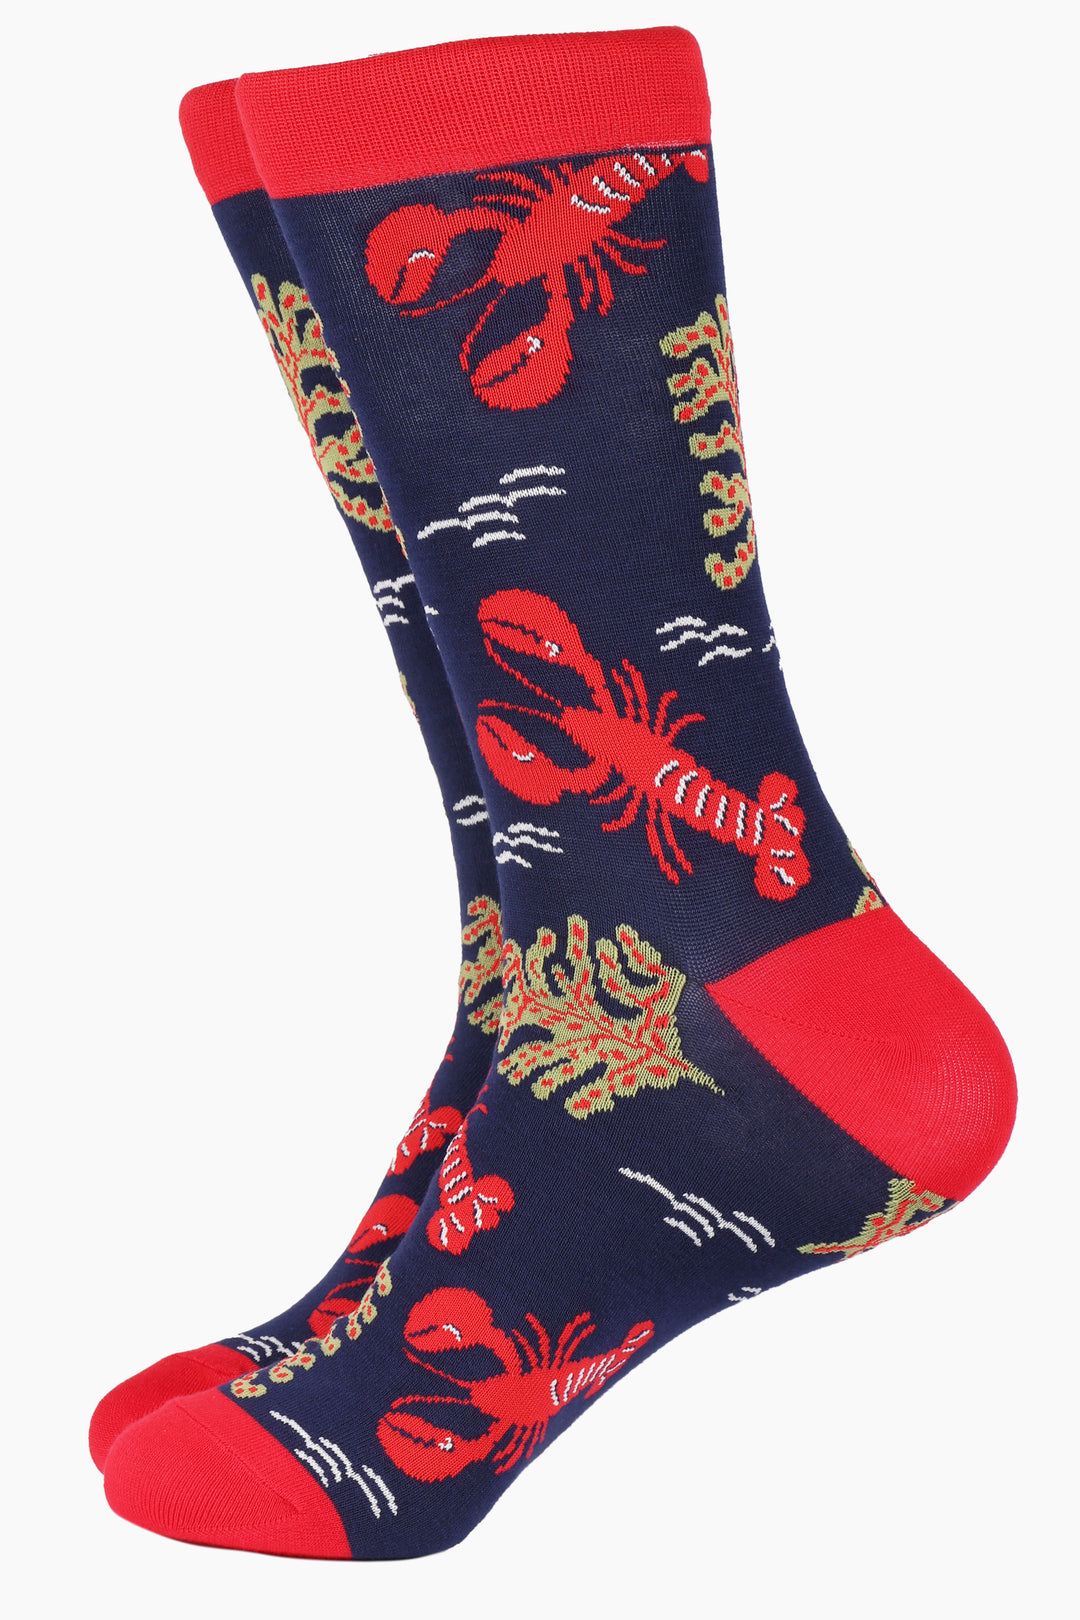 navy blue bamboo socks with an all over pattern of red lobsters and coral plant life